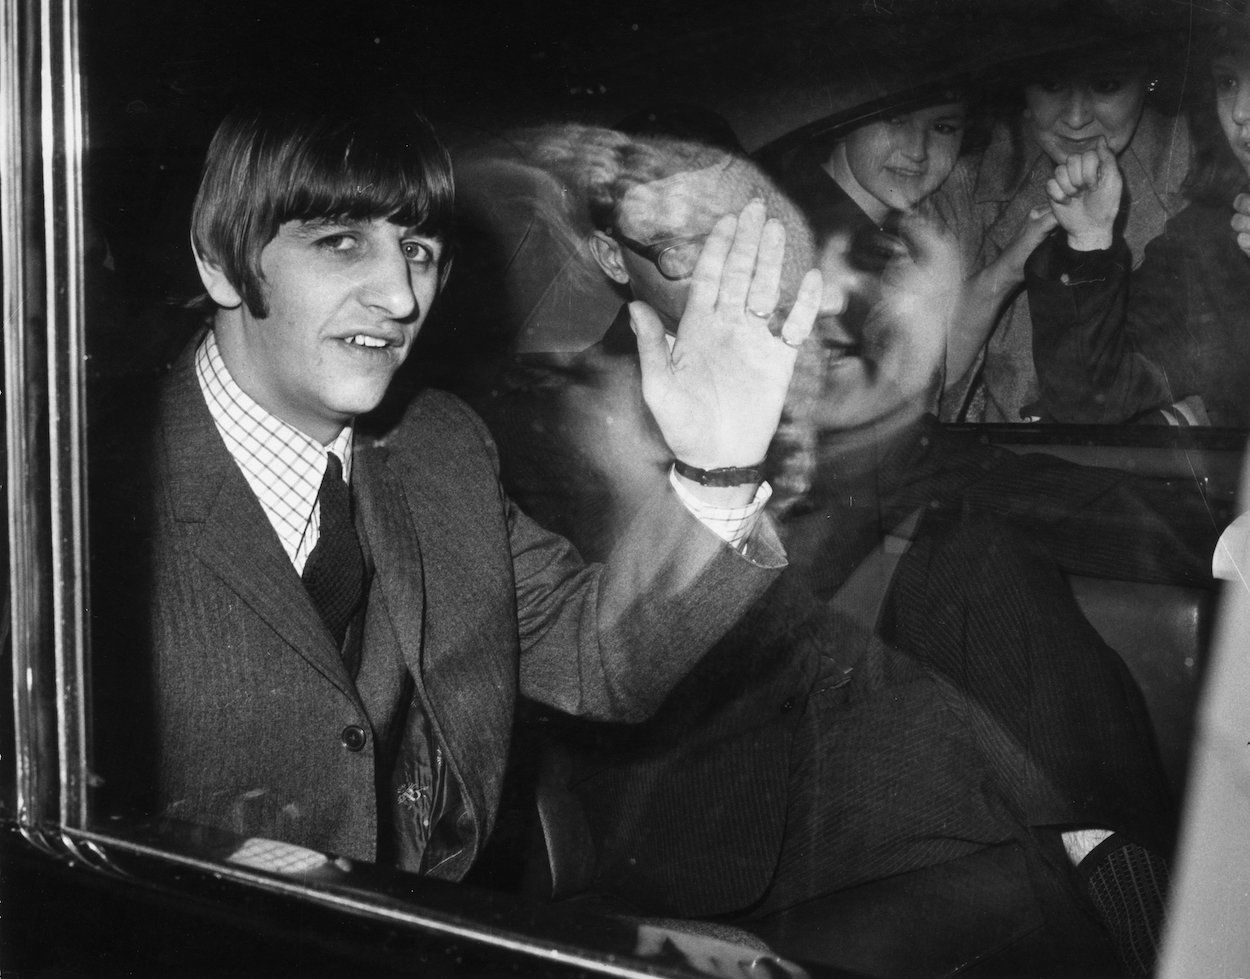 Ringo Starr Once Joked About the Kinds of Beatles Fans He Attracted as He Started Working on a Project Aimed at Them